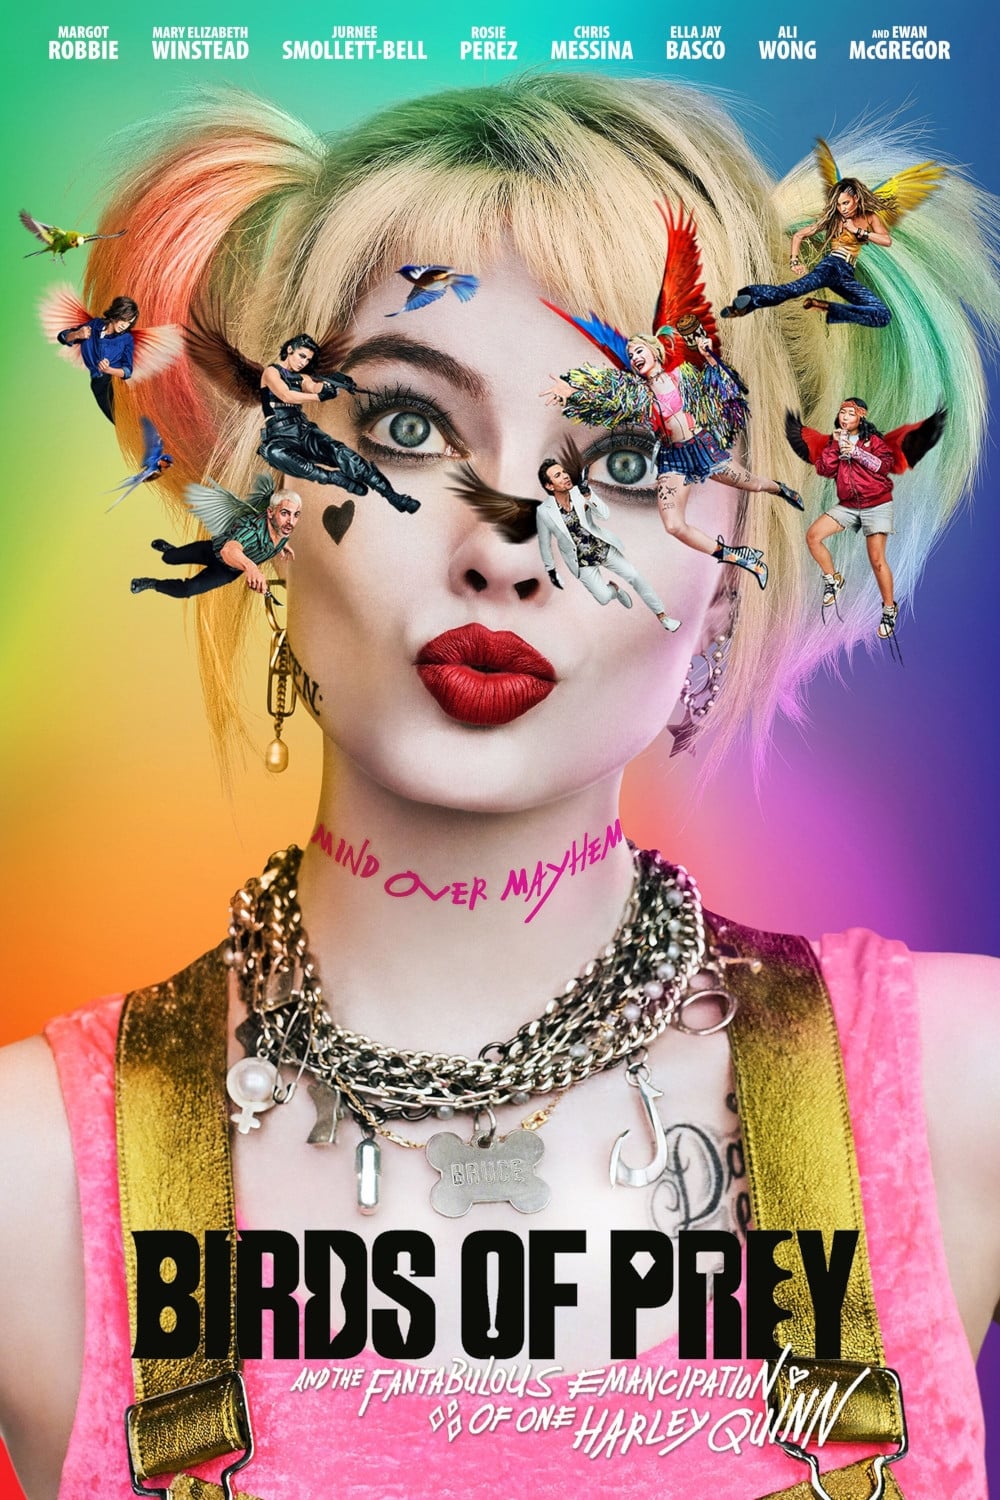 EN - Birds Of Prey And The Fantabulous Emancipation Of One Harley Quinn (2020)  Suicide Squad